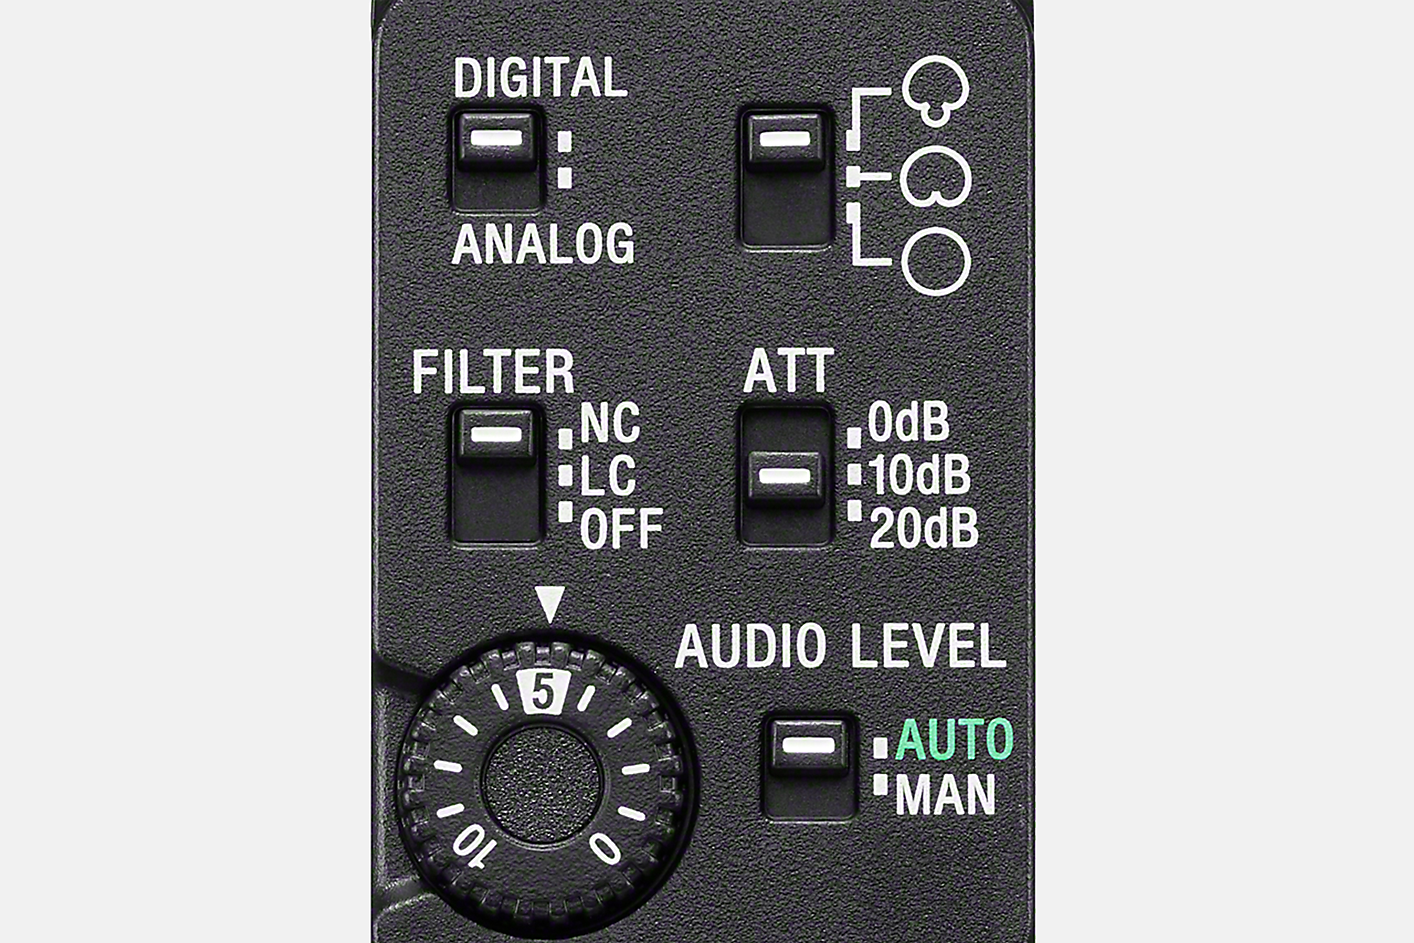 Image of the rear panel of ECM-B10 showing the control switch and dials